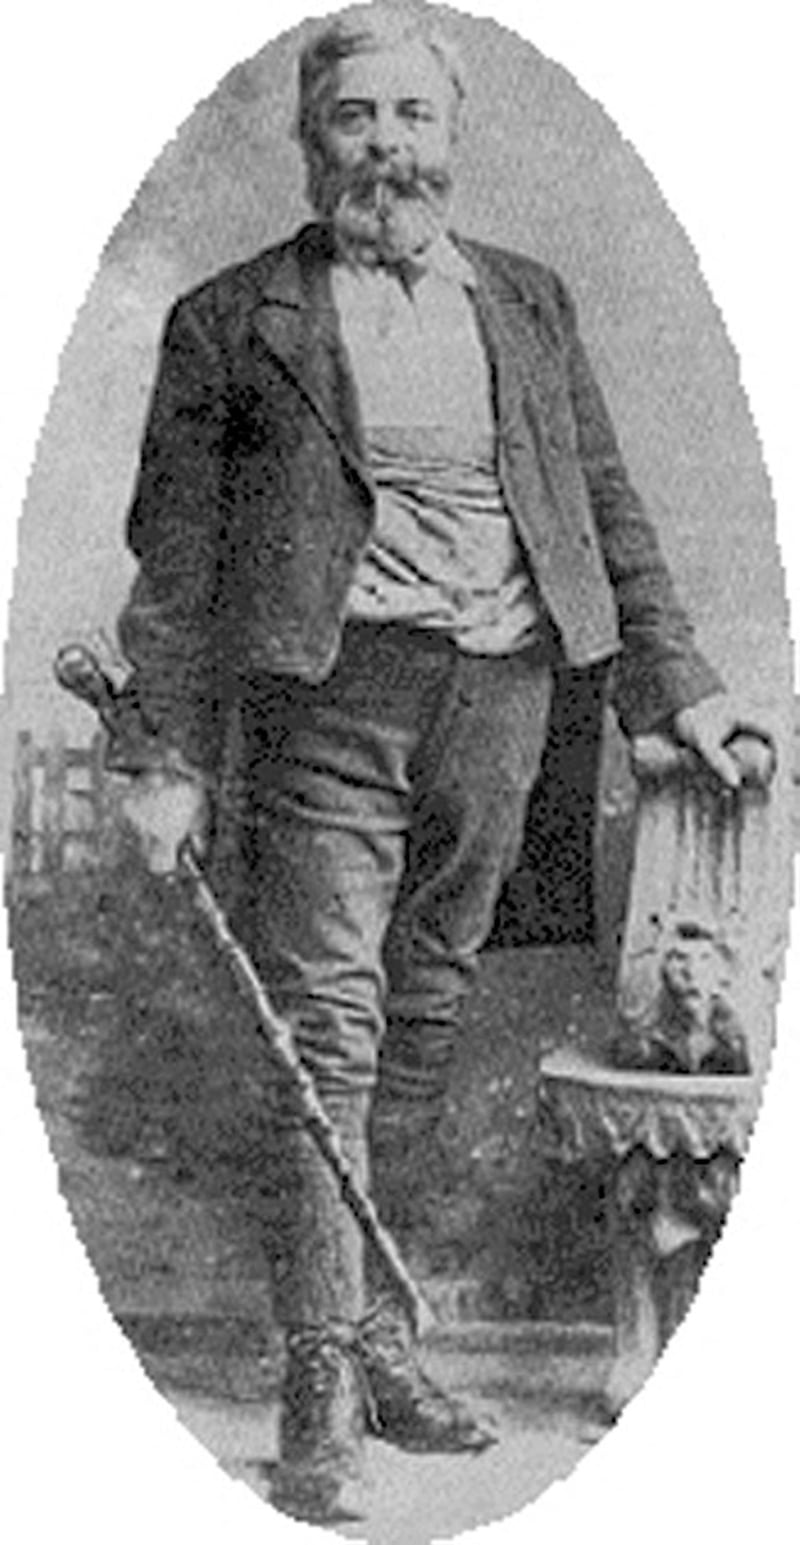 Michael Cusack, founder of the GAA 